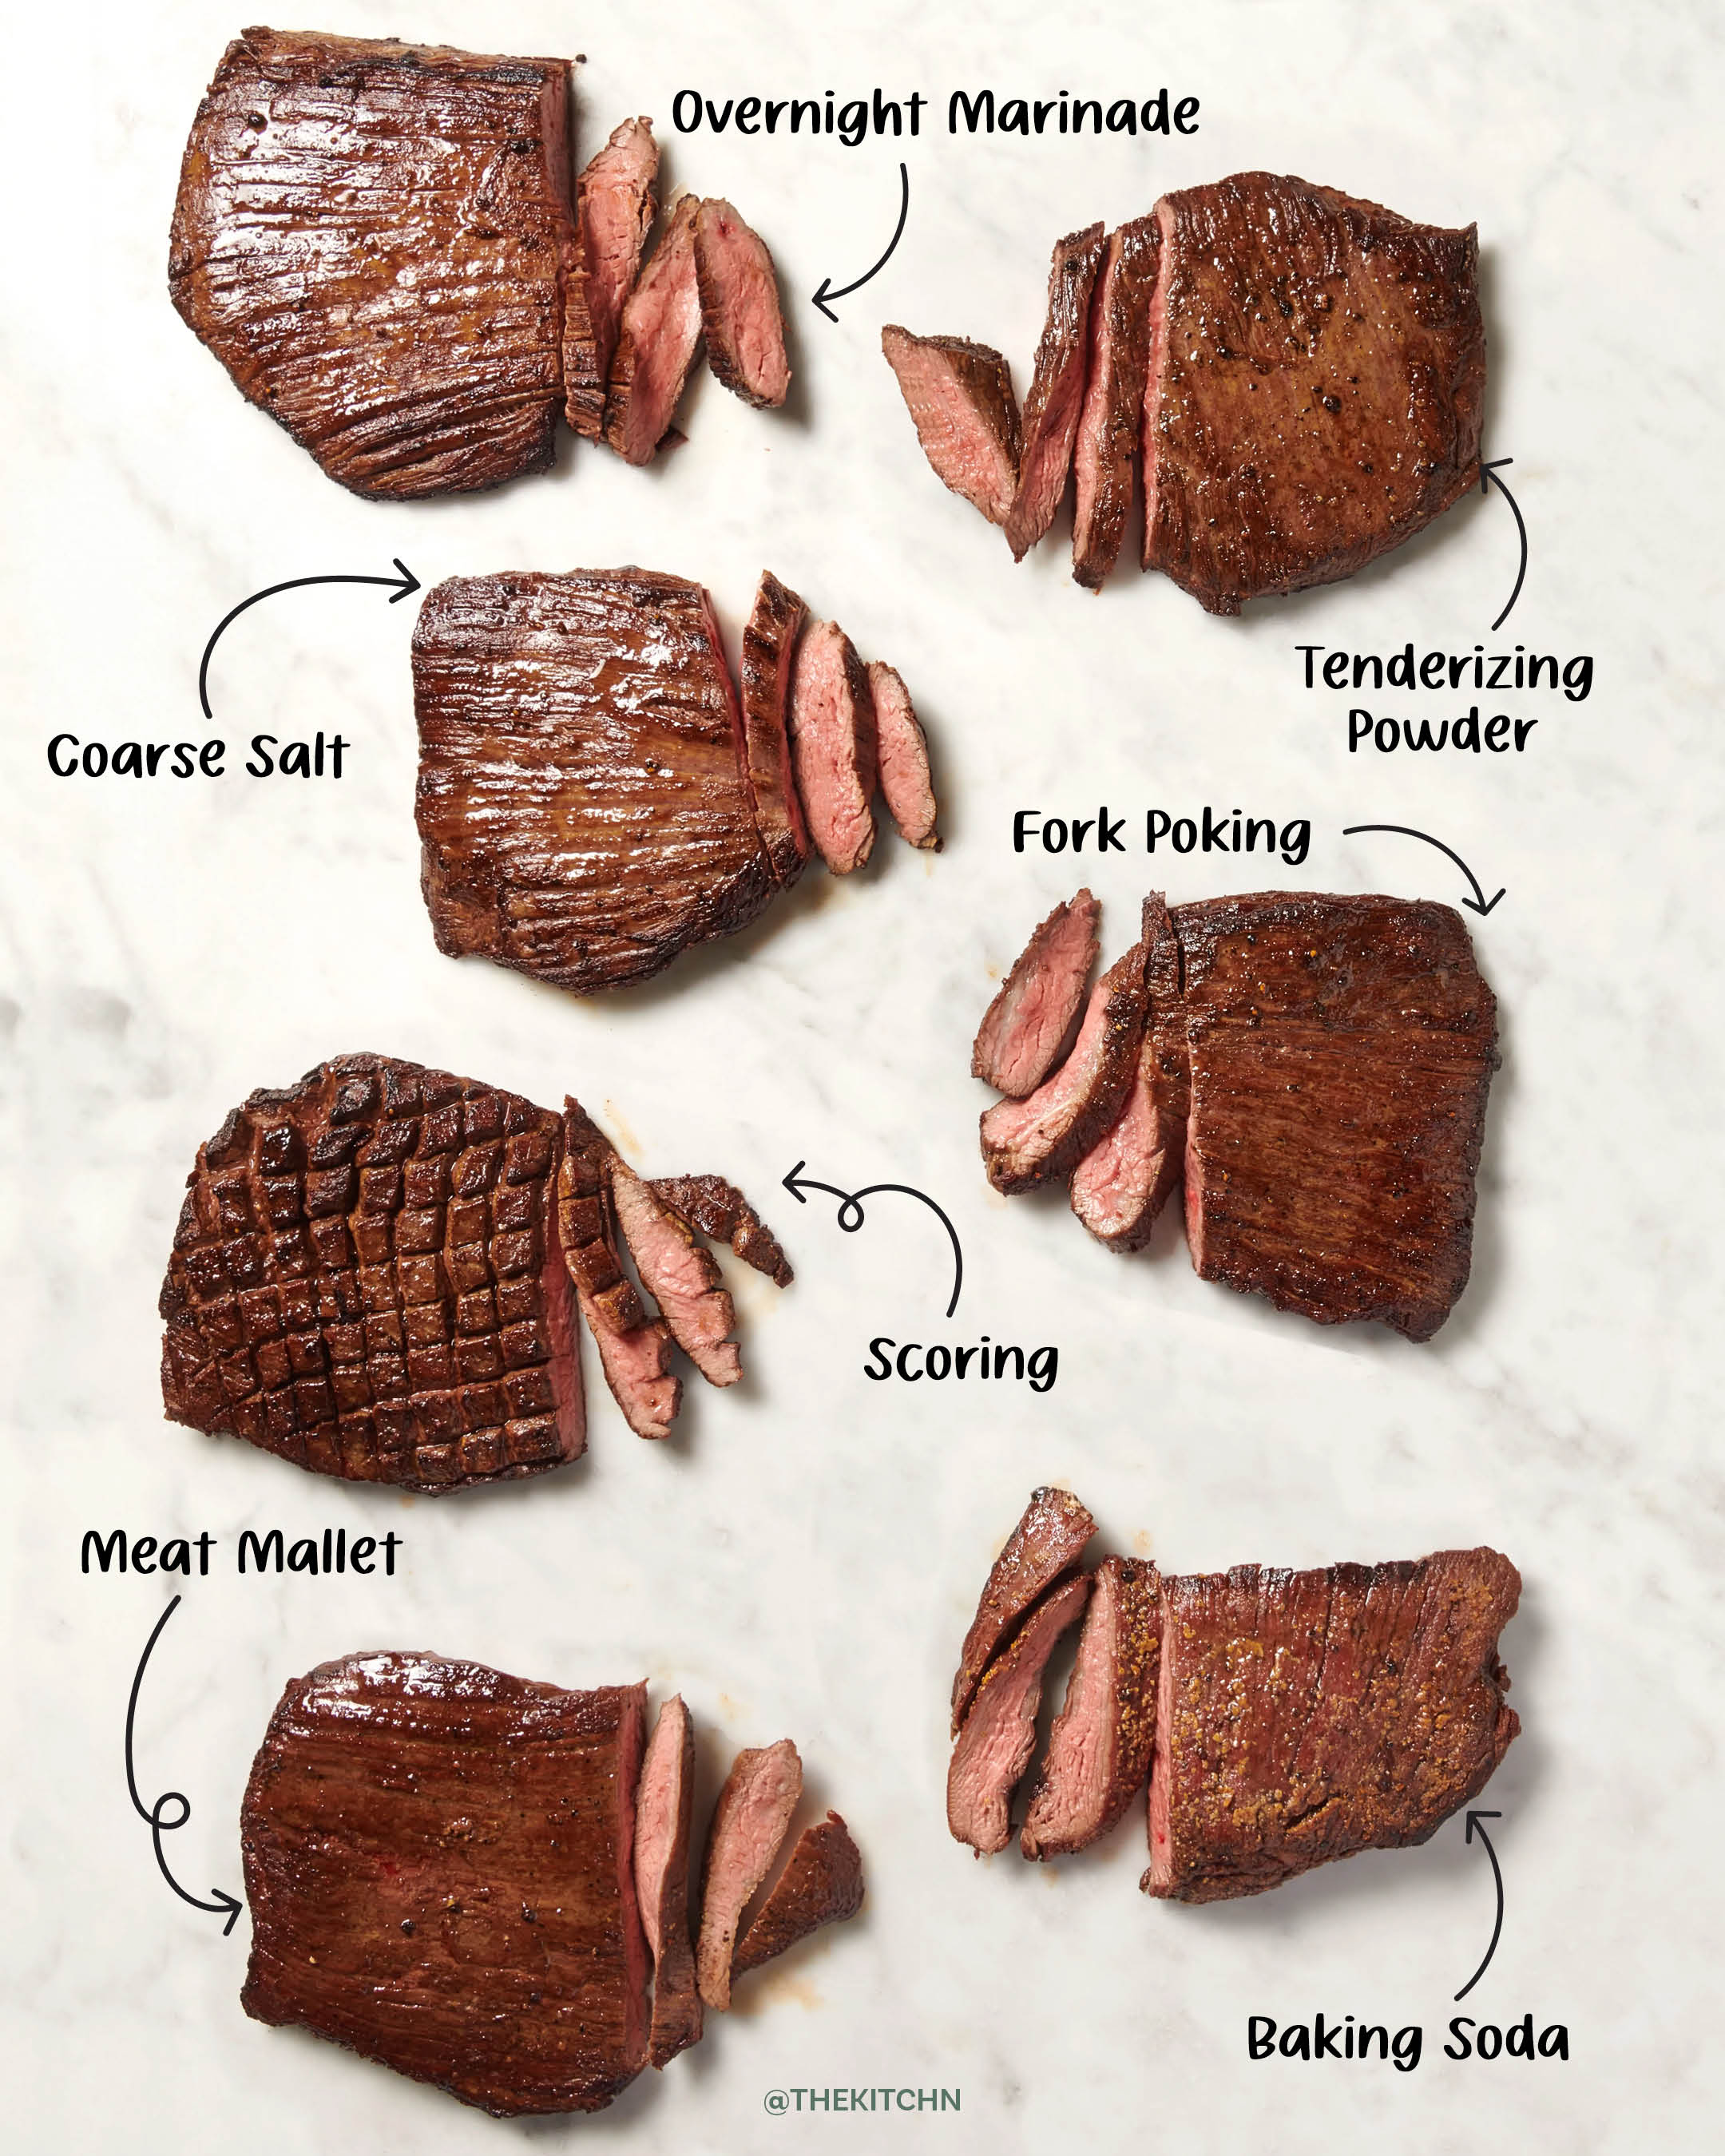 How Grinding Your Meat Fillings Makes Them More Tender and Flavorful